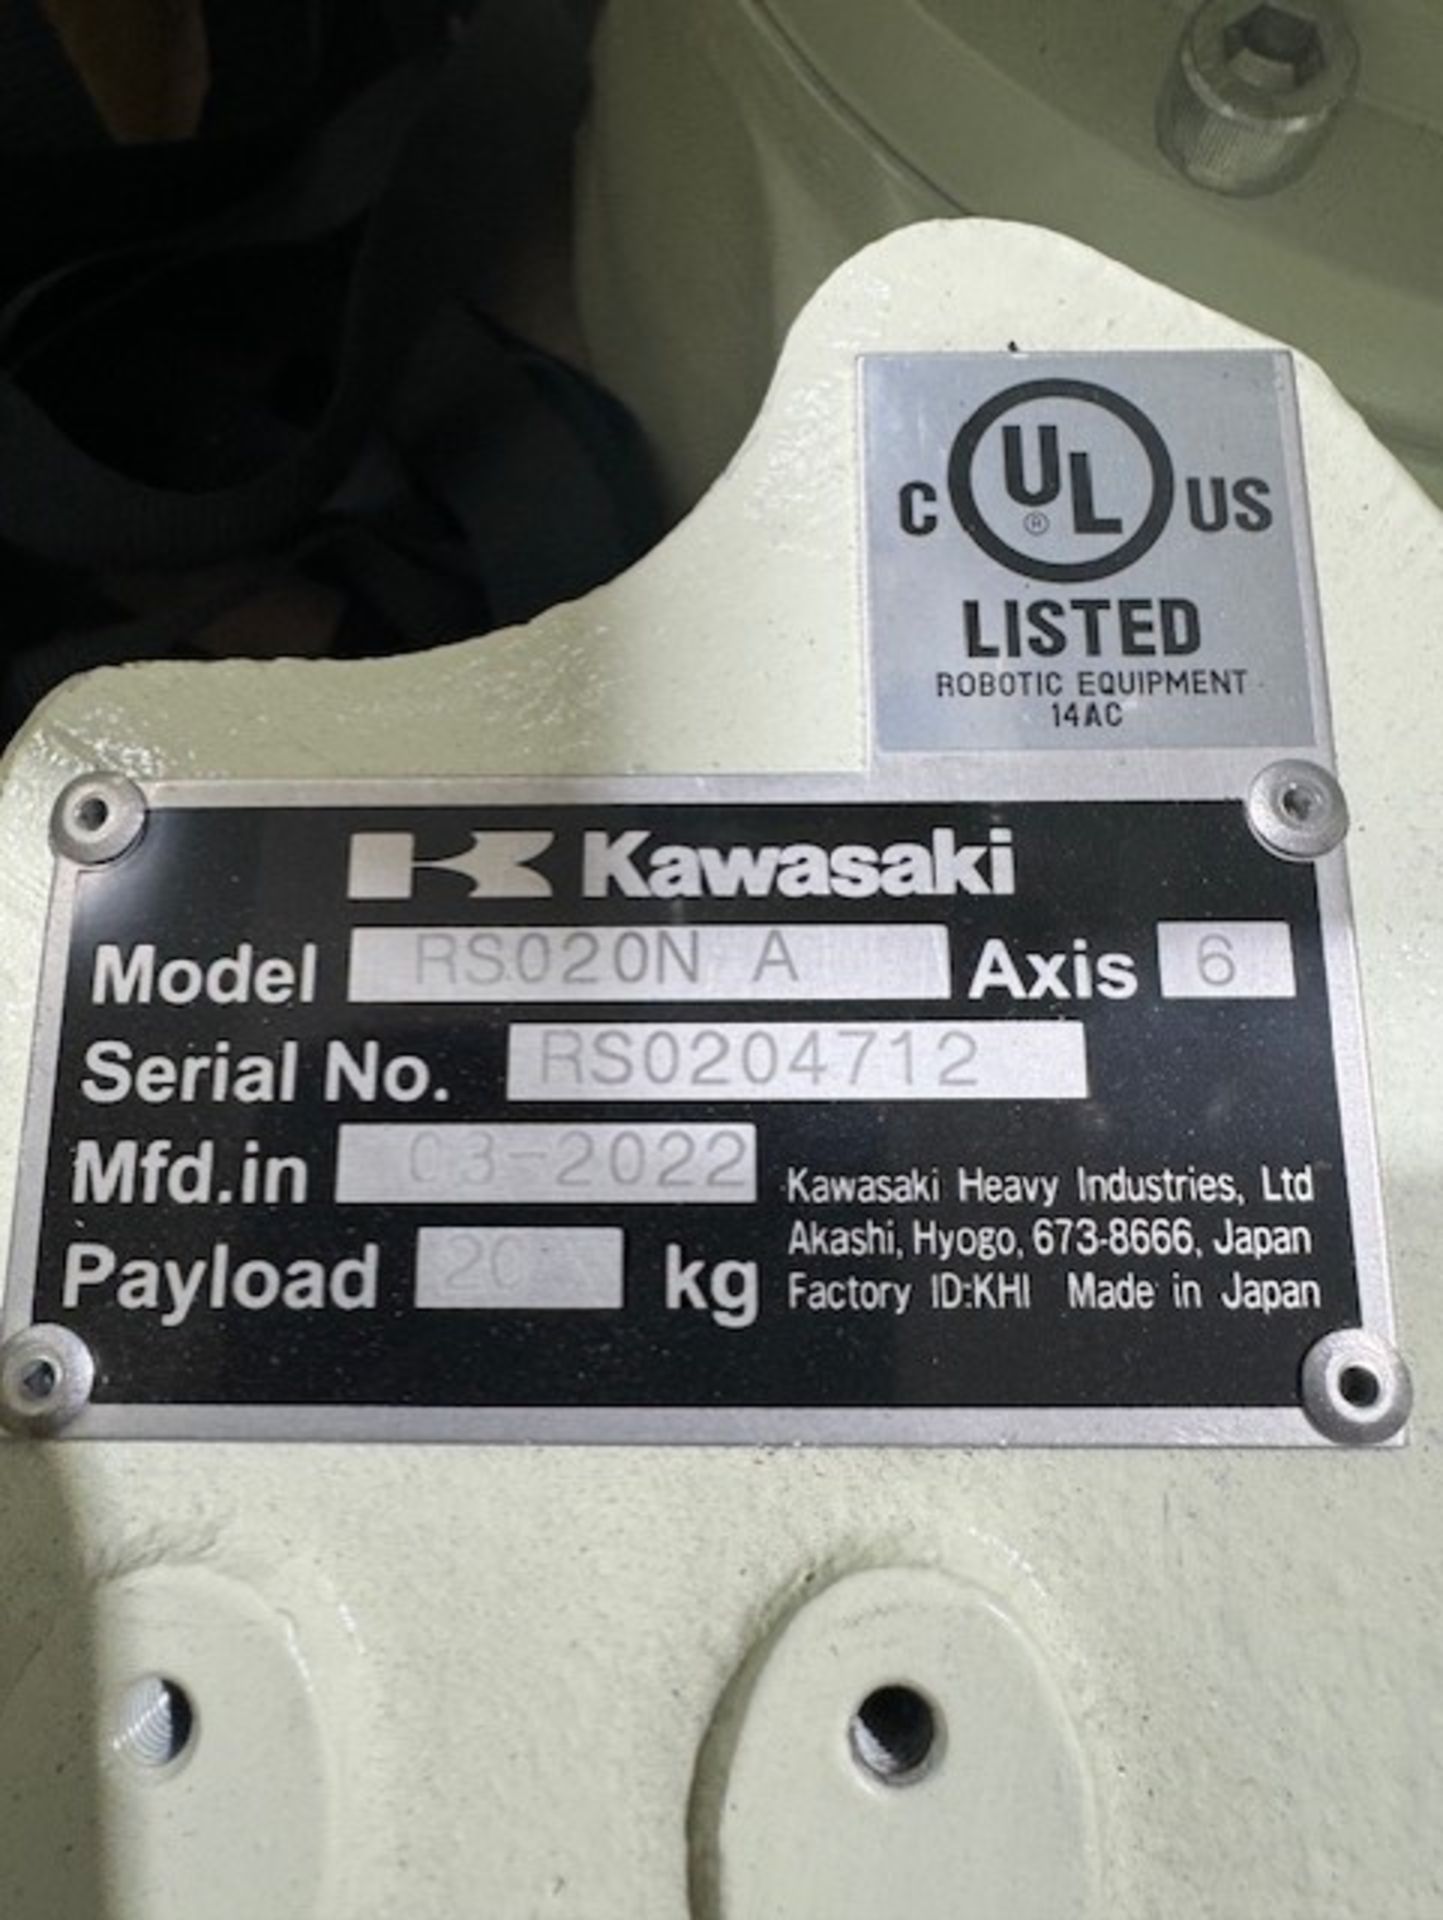 LIGHTLY USED KAWASAKI ROBOT RS020N, SN 4712, 20KG X 1725MM REACH WITH EO1 CONTROLS, CABLES & TEACH - Image 7 of 7